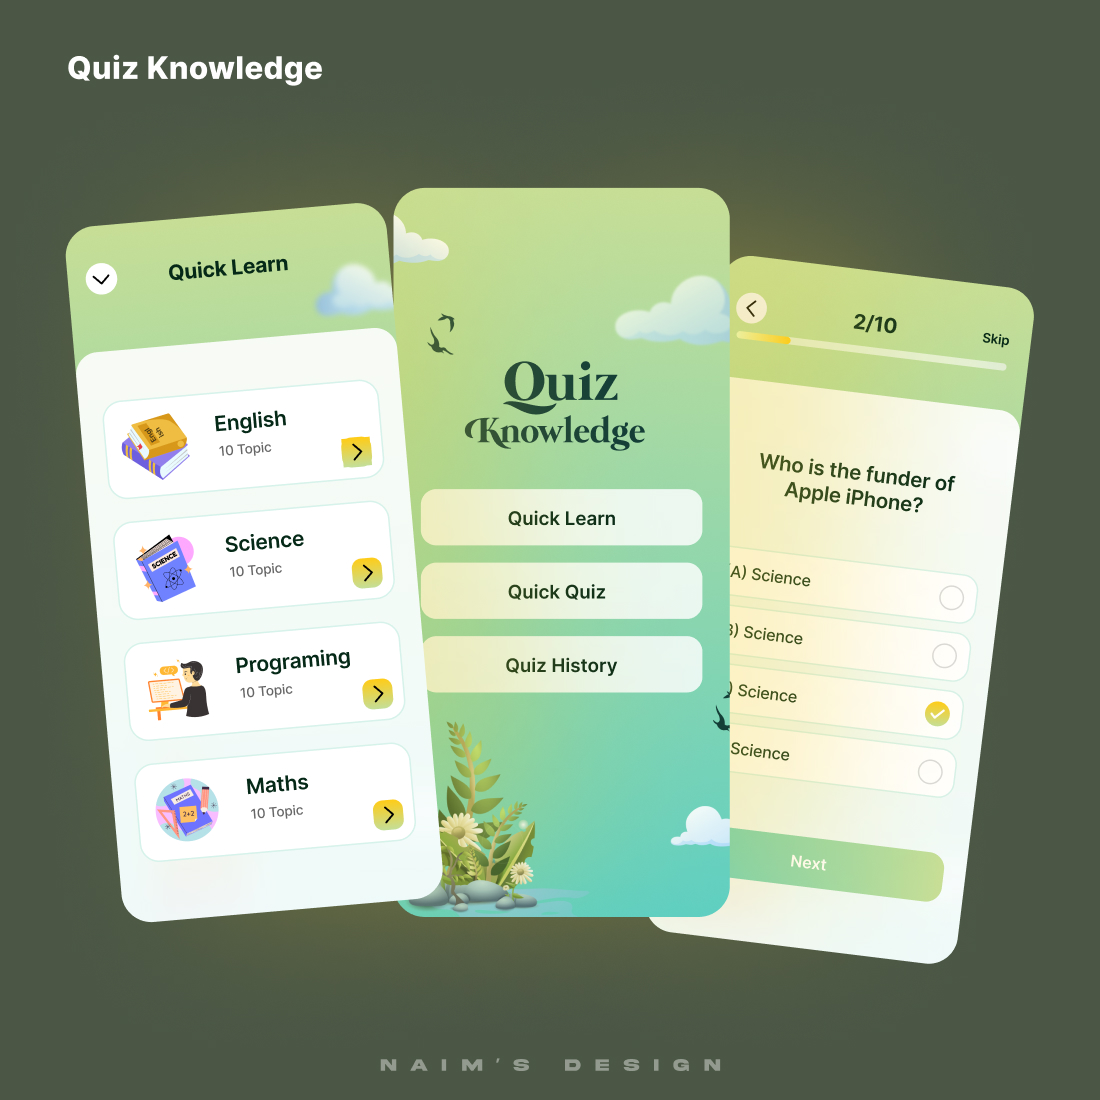 FunQuiz Kids - Engaging Learning for Young Minds cover image.